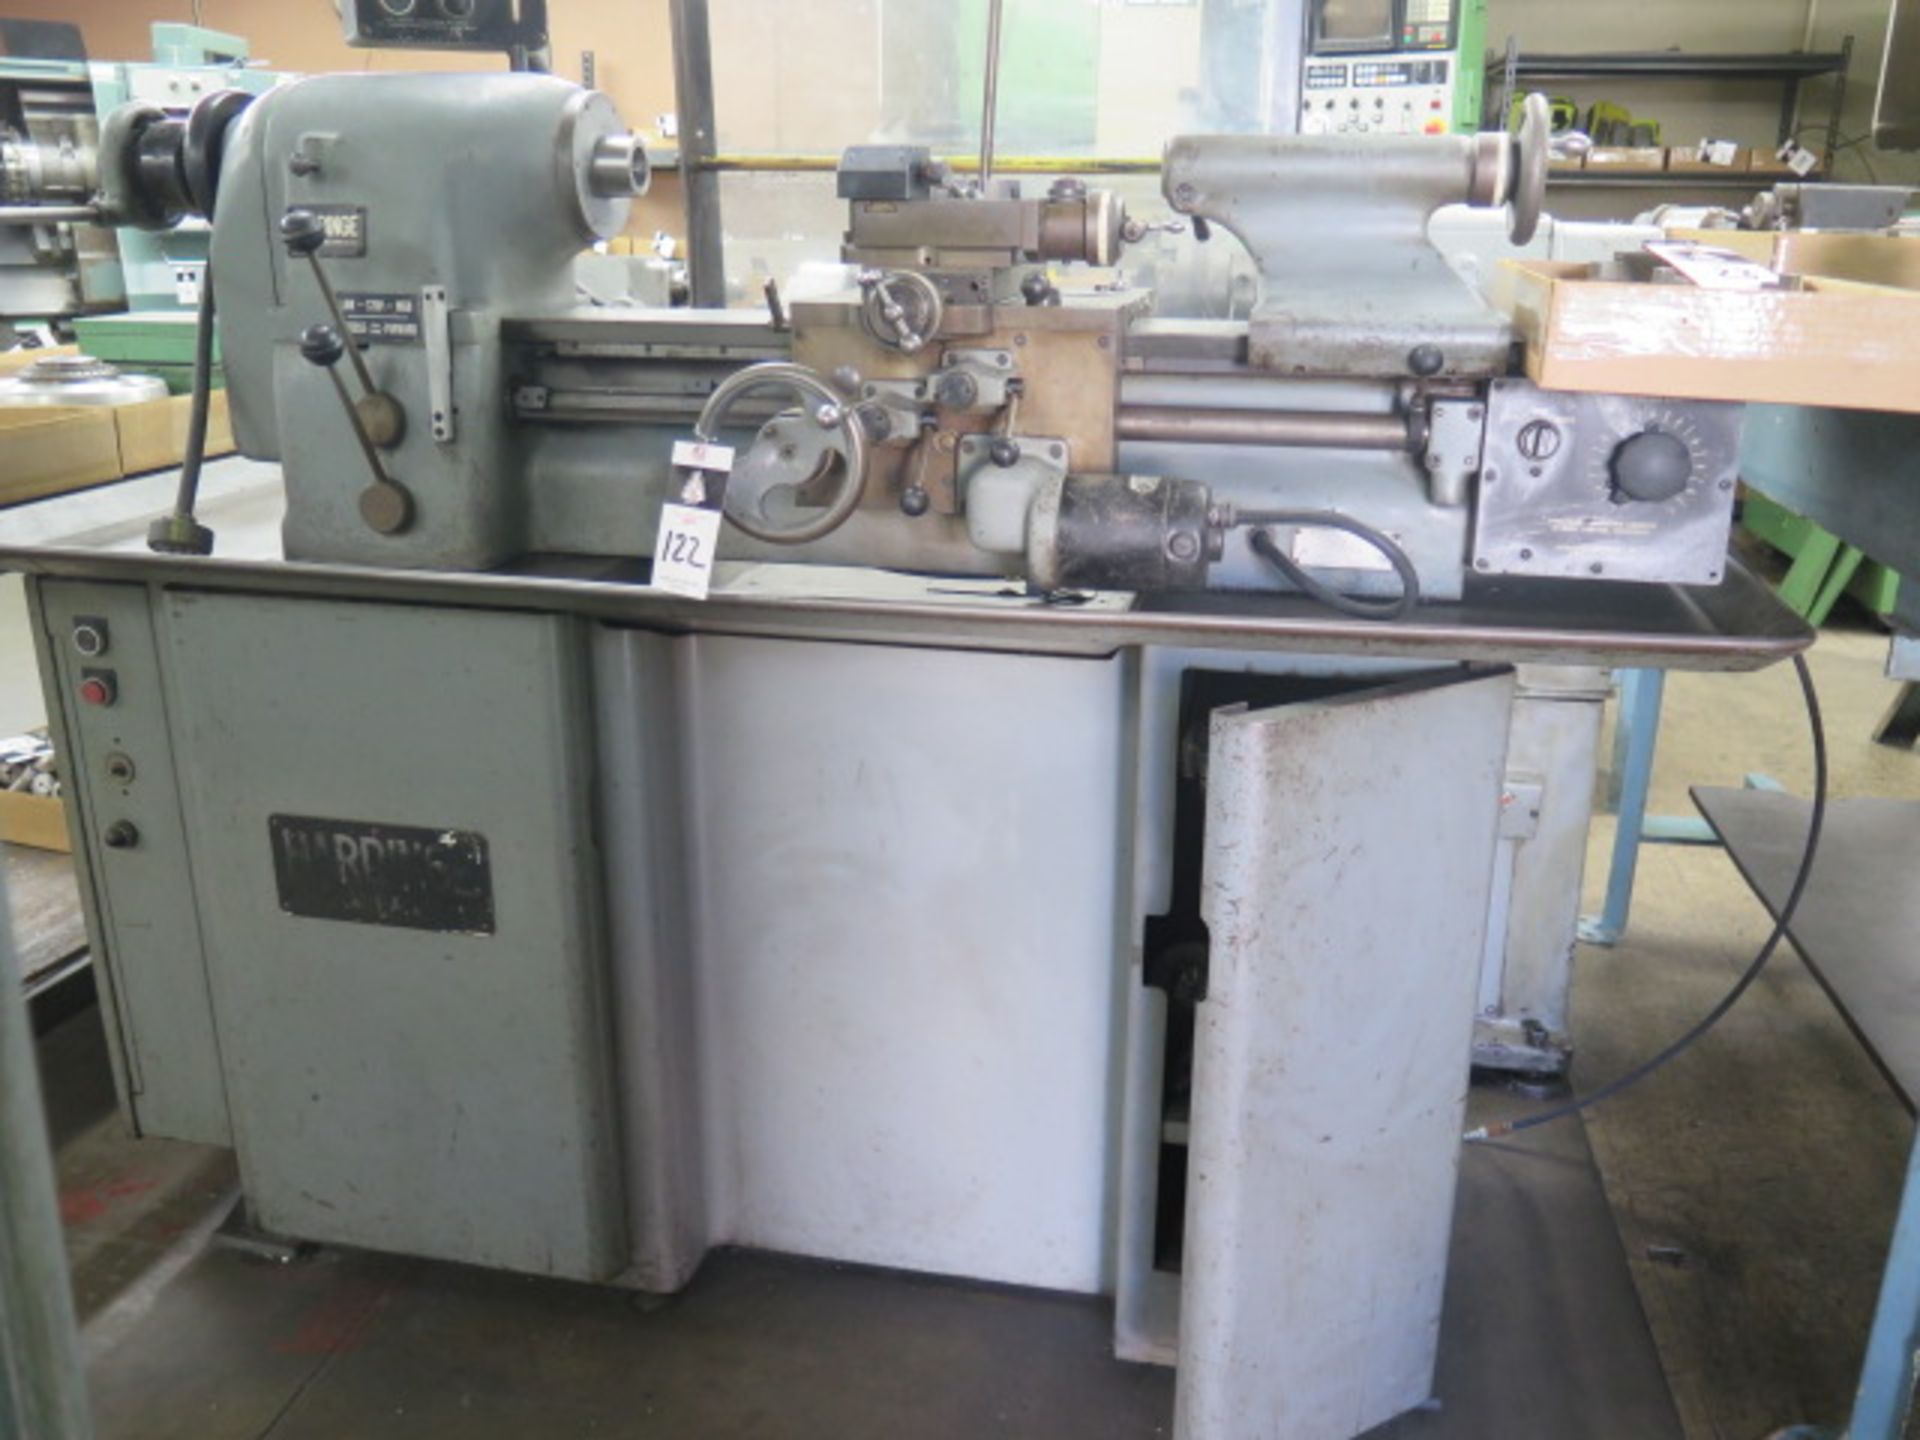 Hardinge TFB-H Wide Bed Second OP Lathe w/ 125-3000 RPM, Tailstock, Power Feeds, KDK, SOLD AS IS